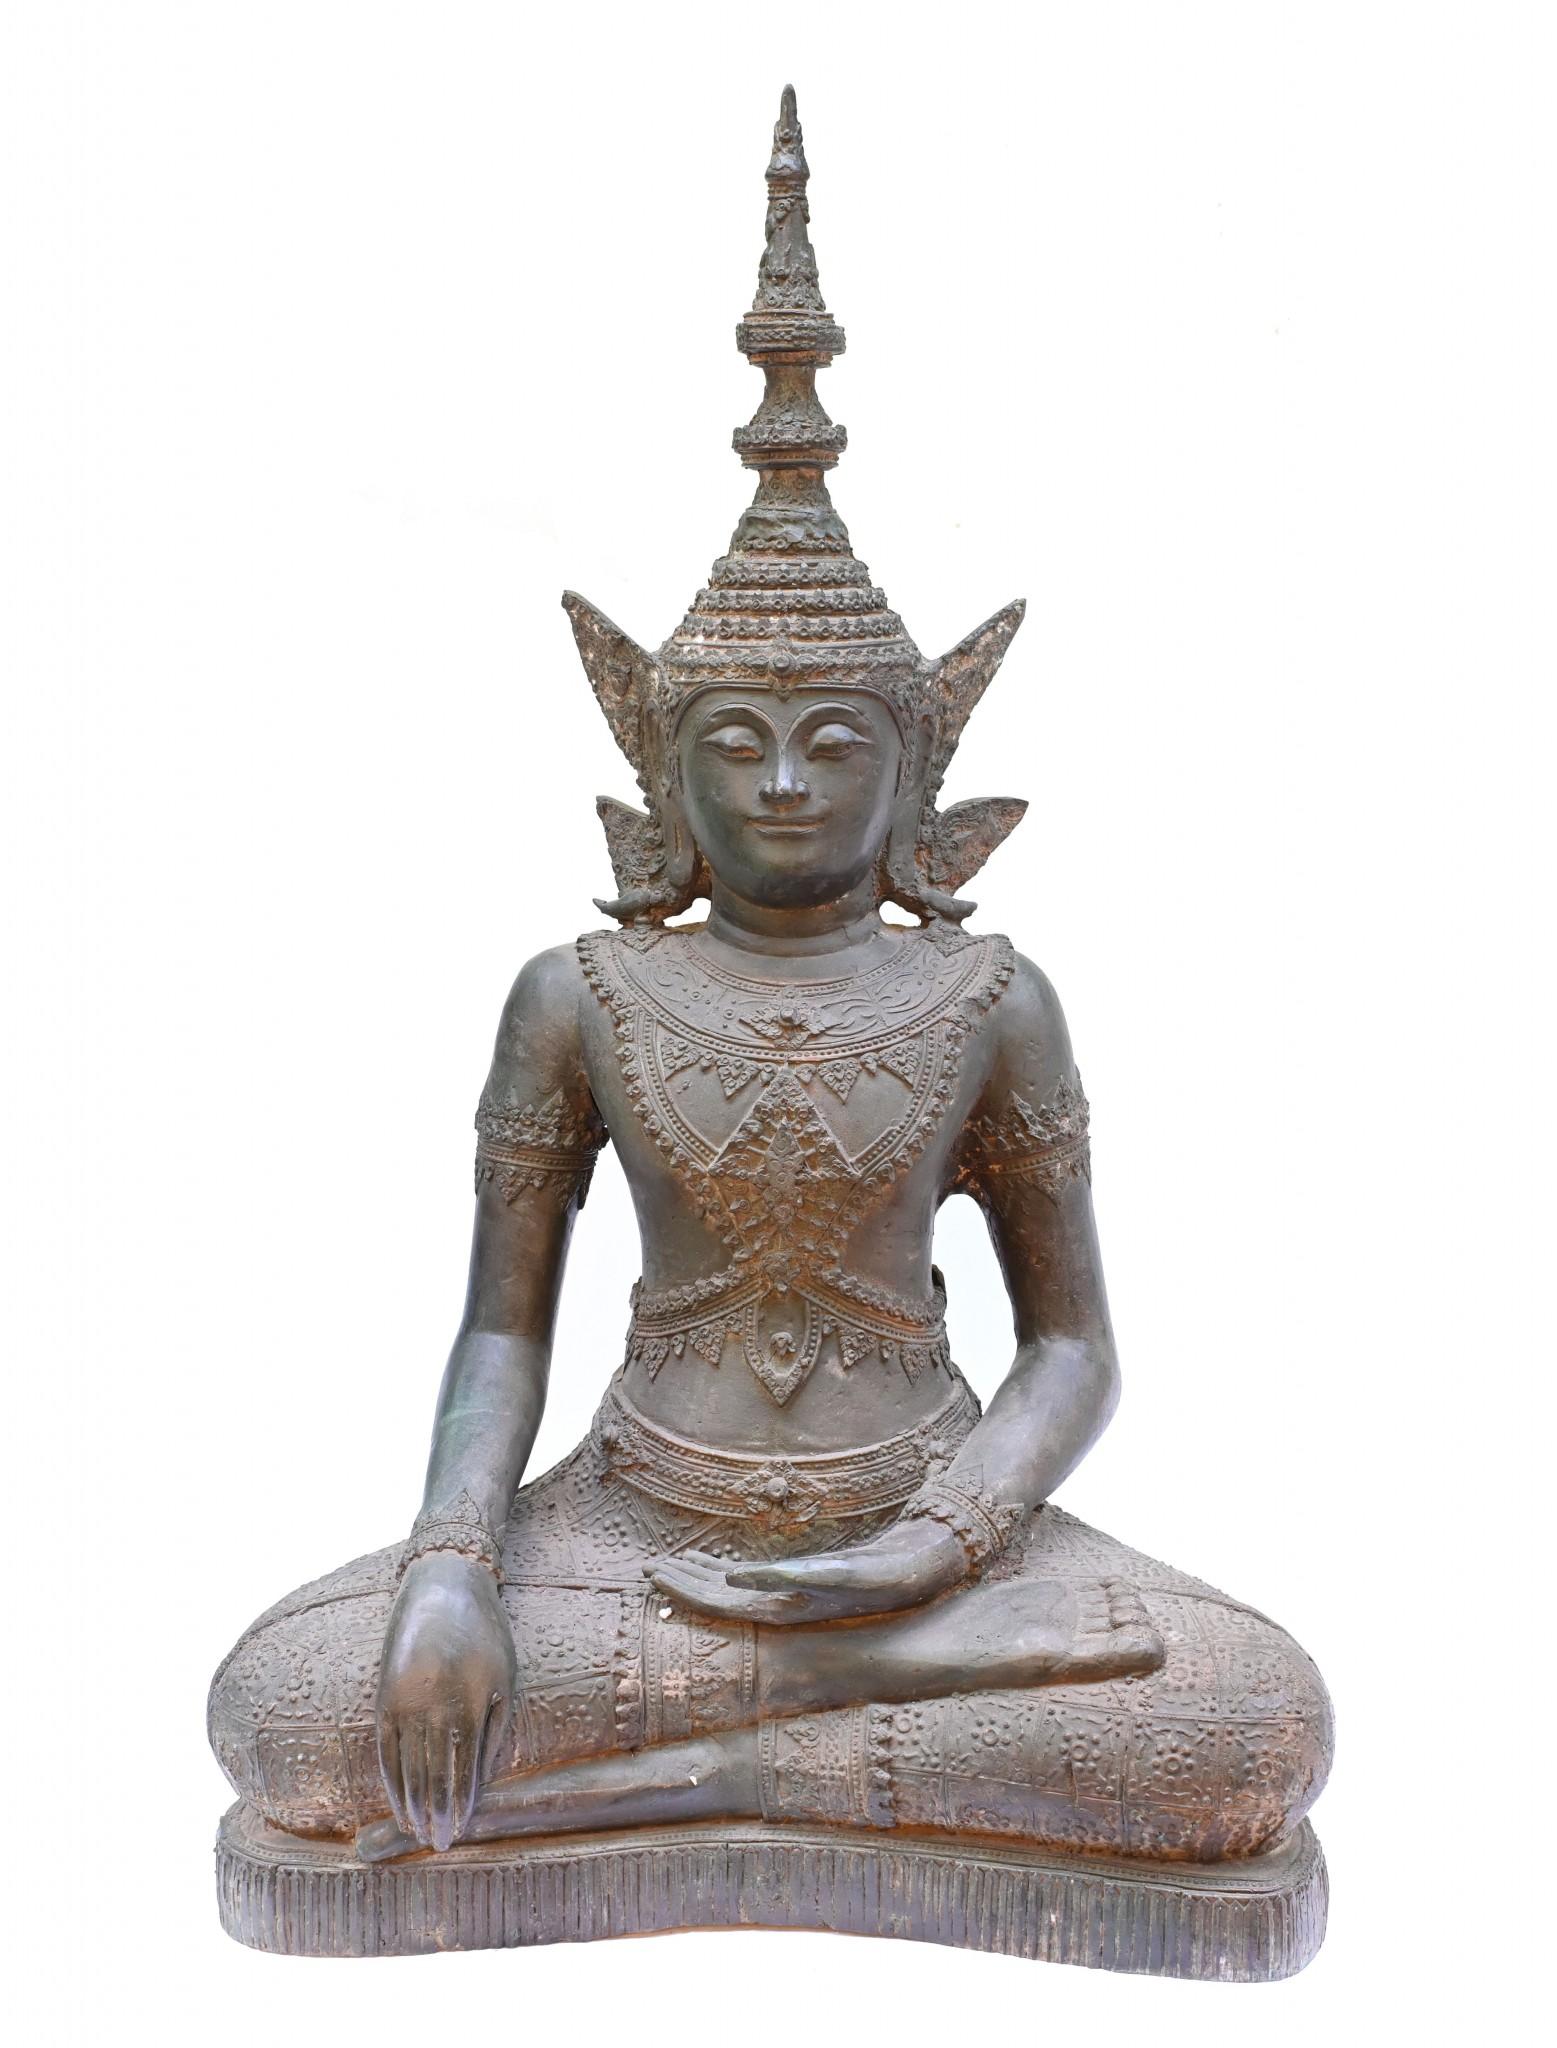 Glorious antique bronze Tibetan buddha statue
Classic meditation pose, this would add serenity and calm to any interior
Great patina to the bronze
We purchased this from a private residence in London's Bloomsbury
Offered in great shape ready for